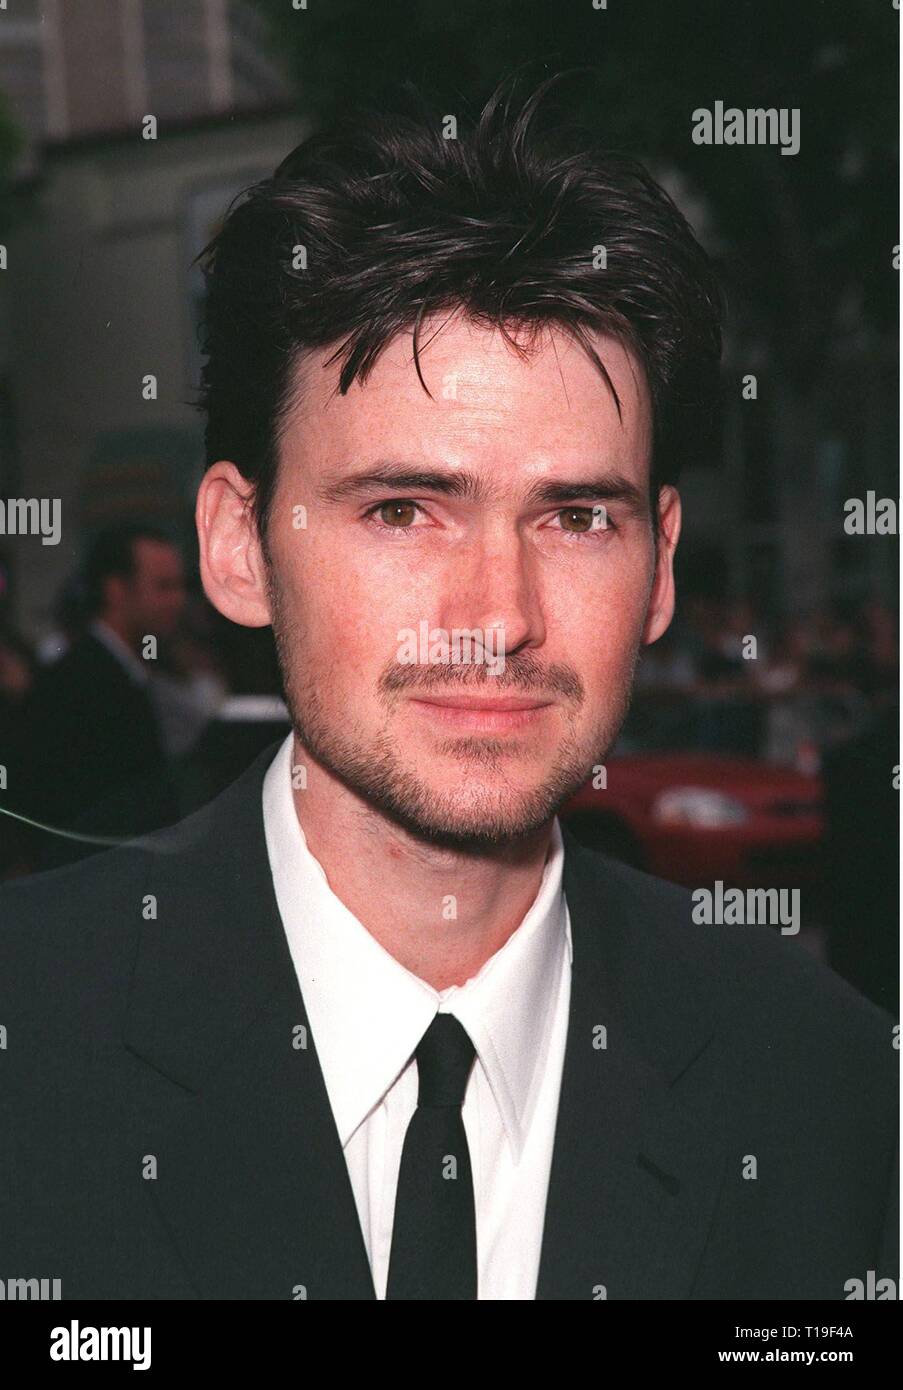 LOS ANGELES, CA - July 22, 1998:  Actor JEREMY DAVIES at world premiere of his new movie, "Saving Private Ryan," in Los Angeles. Stock Photo